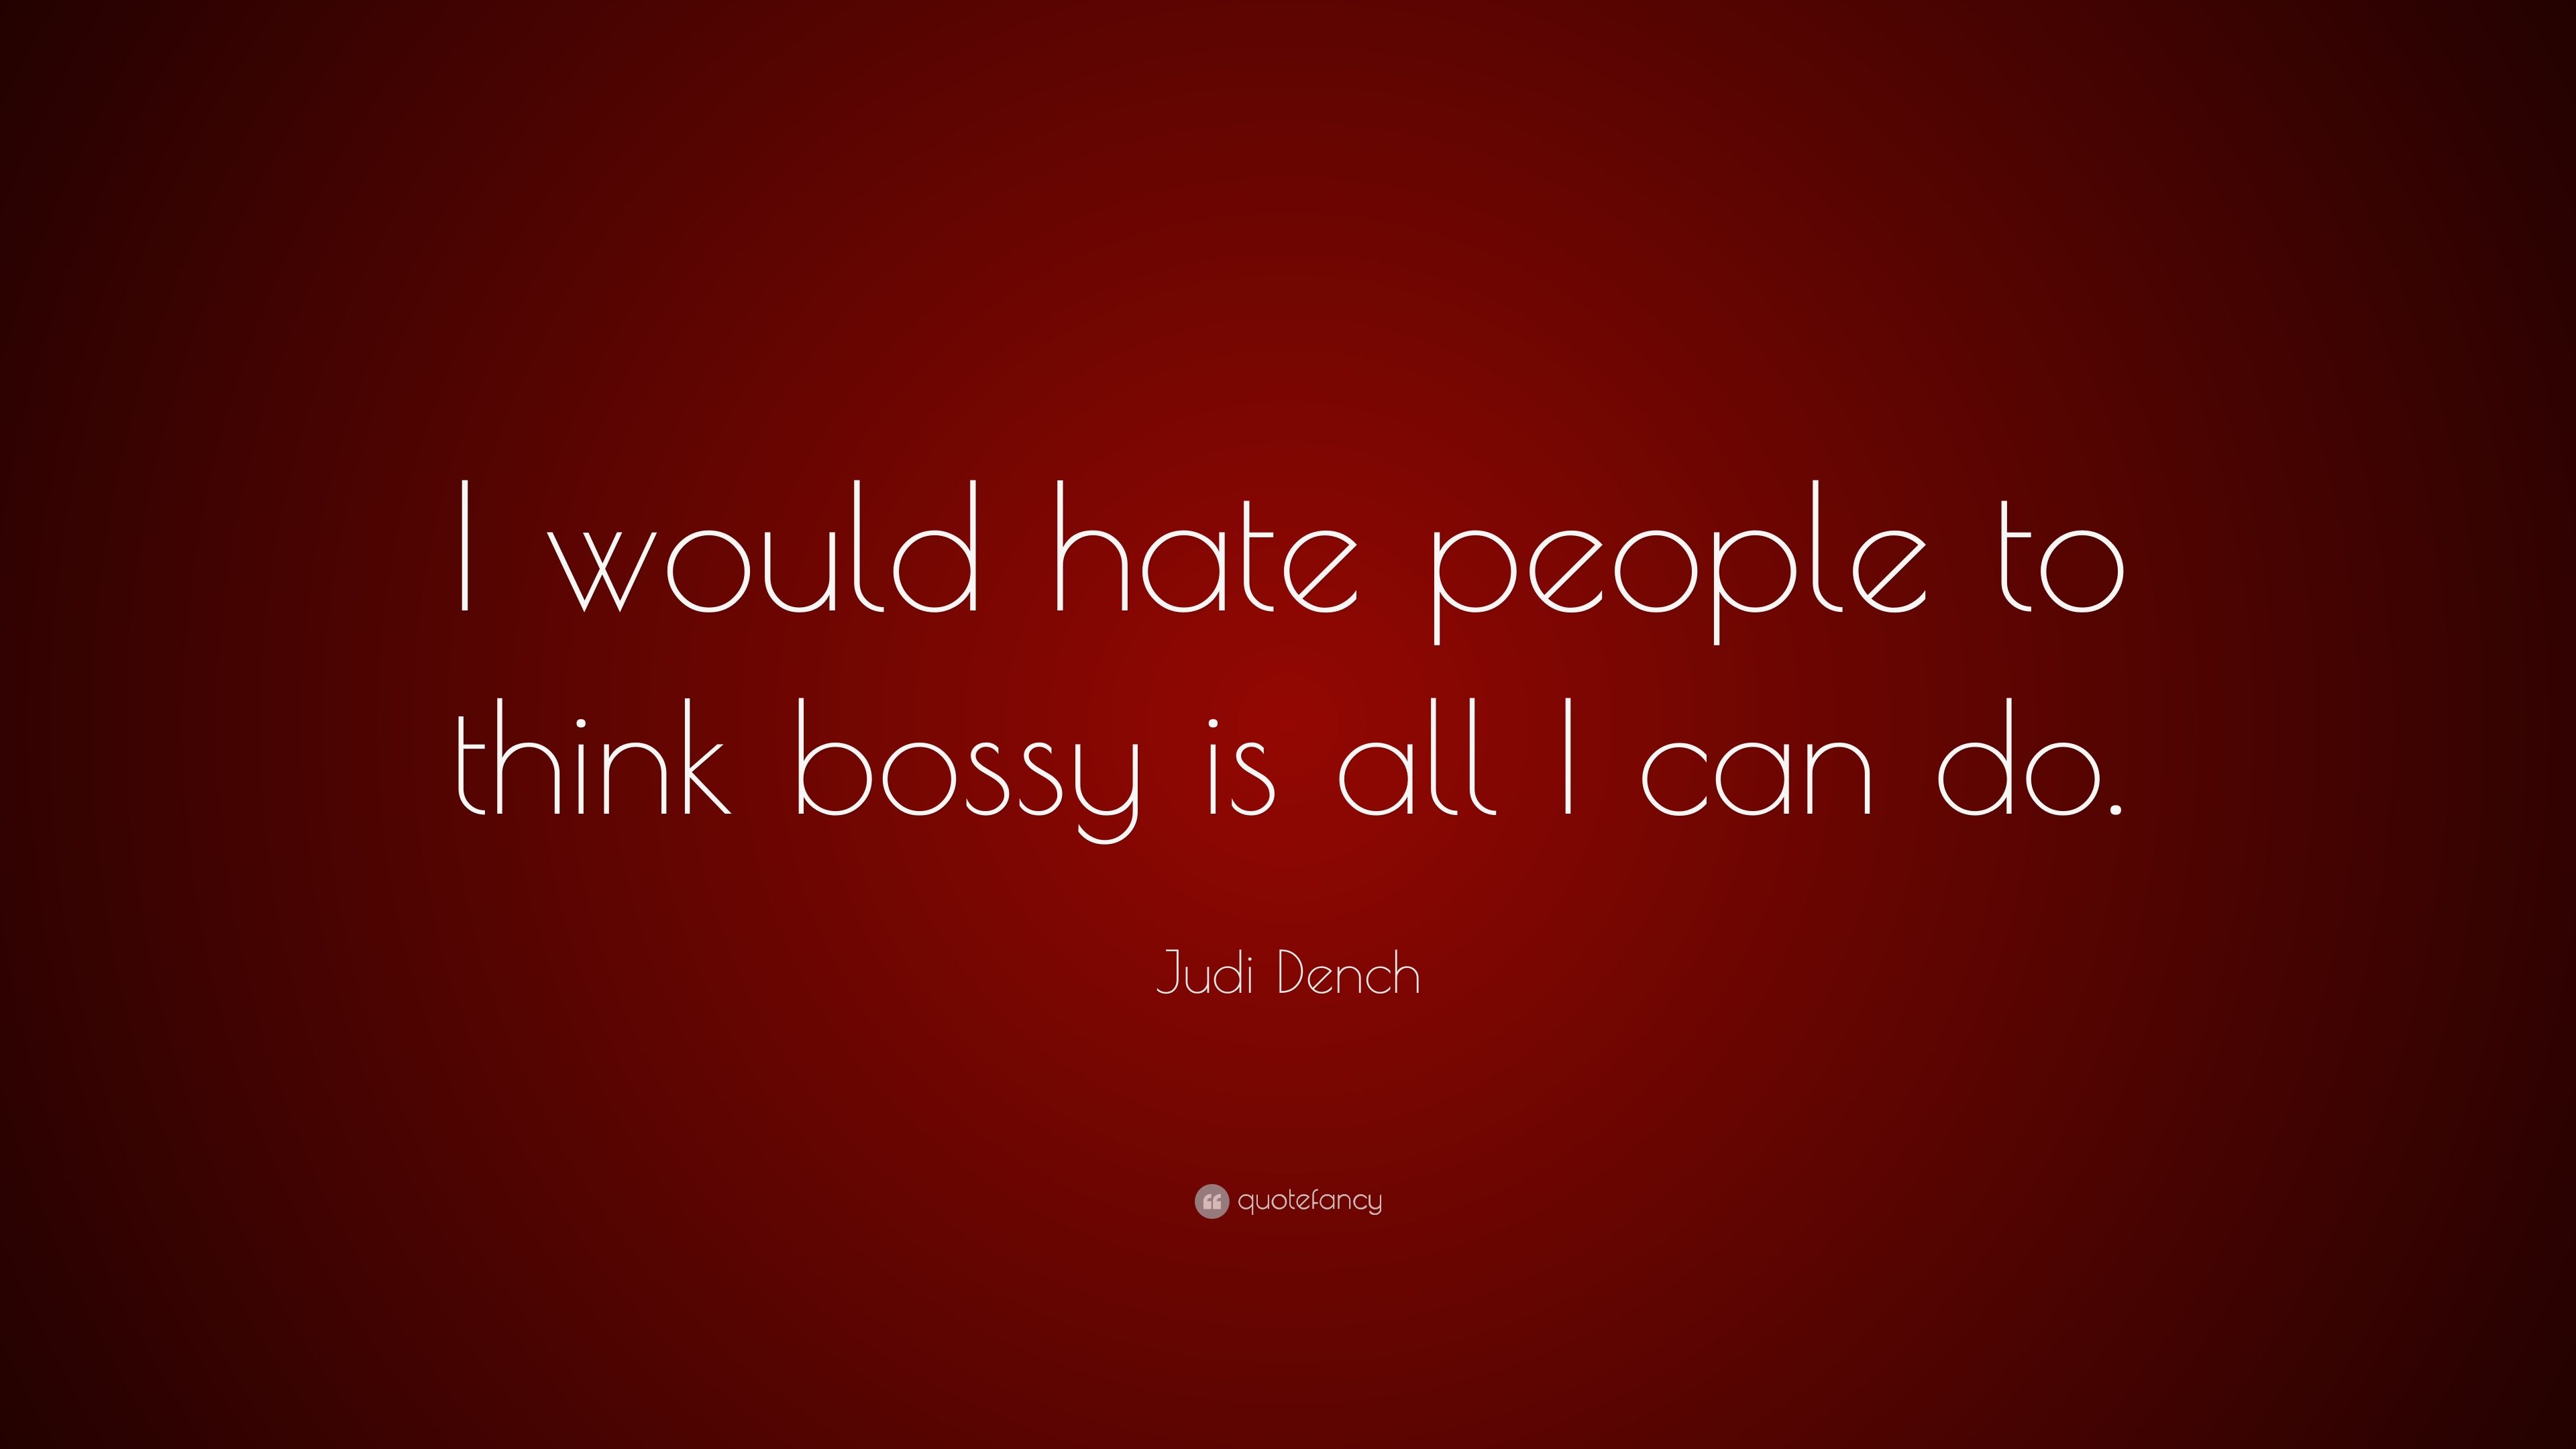 Judi Dench Quote: “I would hate people to think bossy is all I can do.” (7 wallpaper)